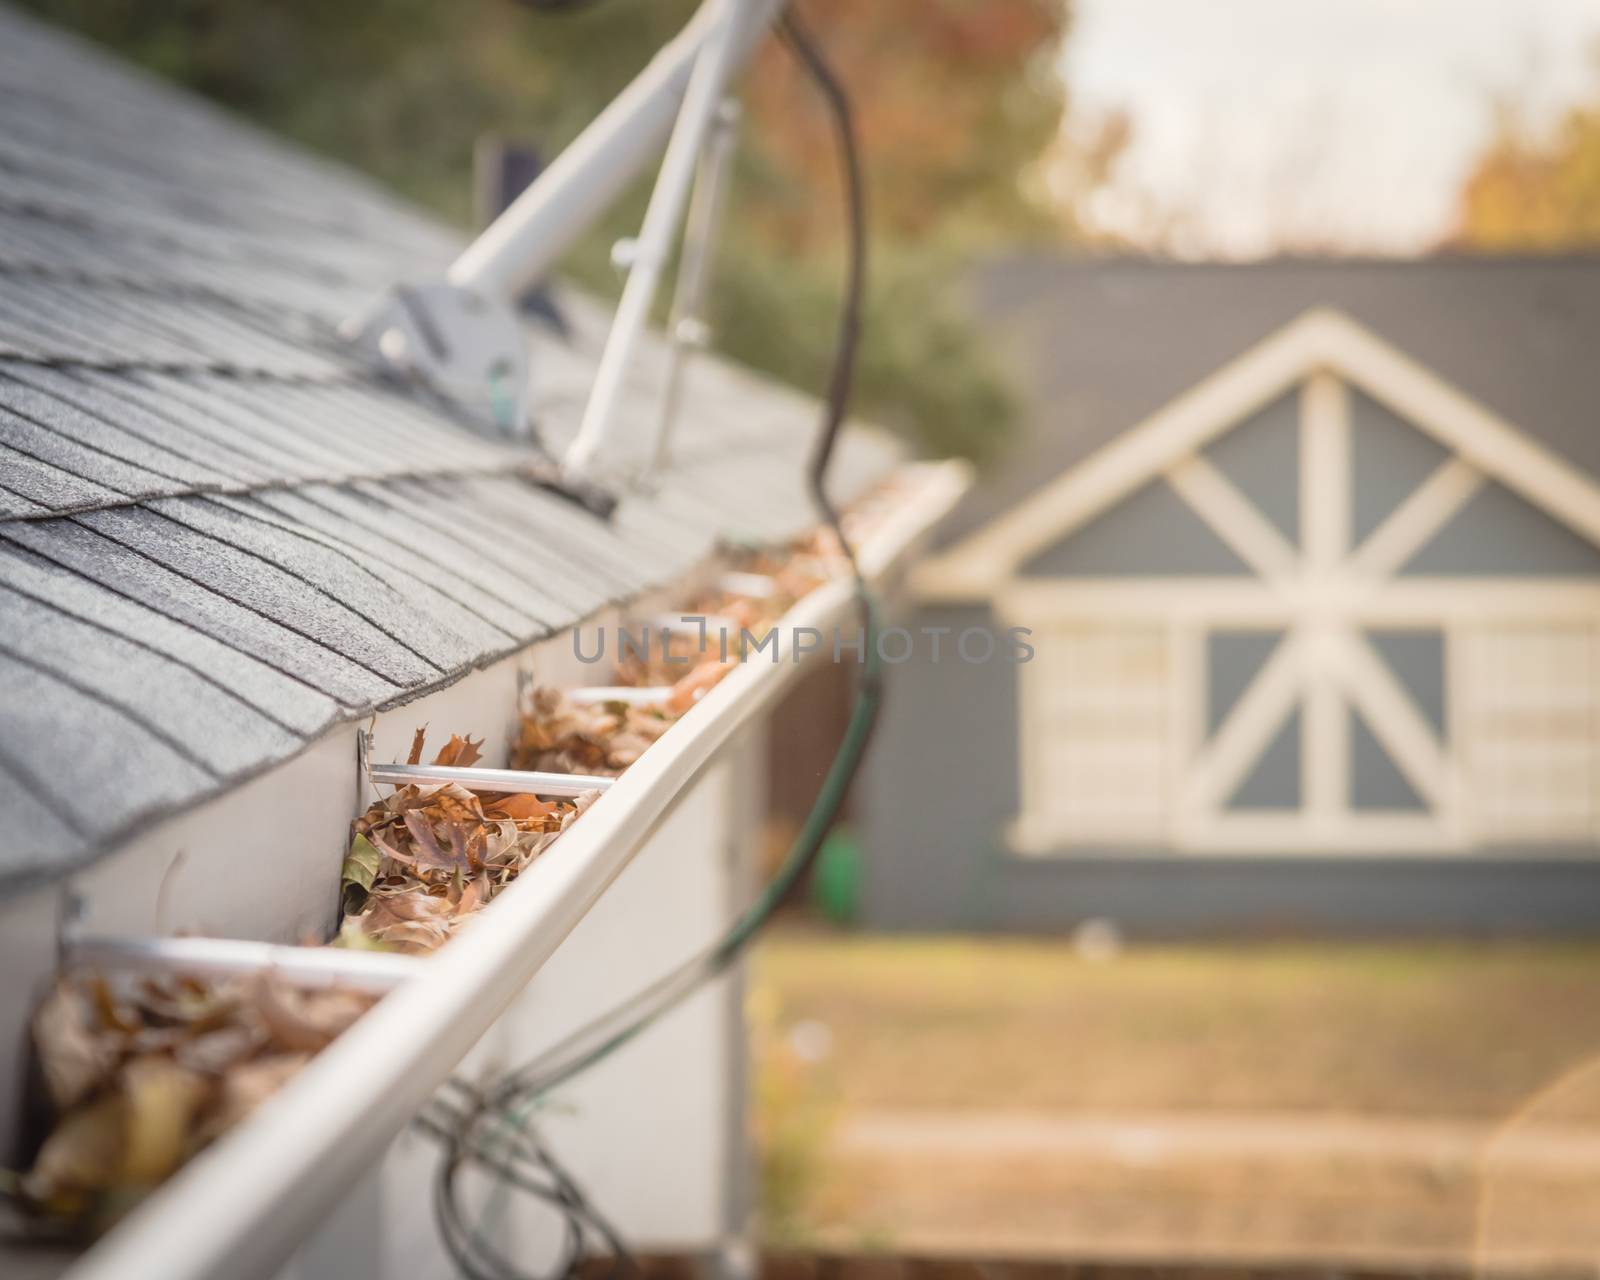 Blocked gutter near roof shingles with satellite dish in background. Clogged drain pipe full of dried leaves and dirty need to clean-up. Gutter cleaning and home maintenance concept